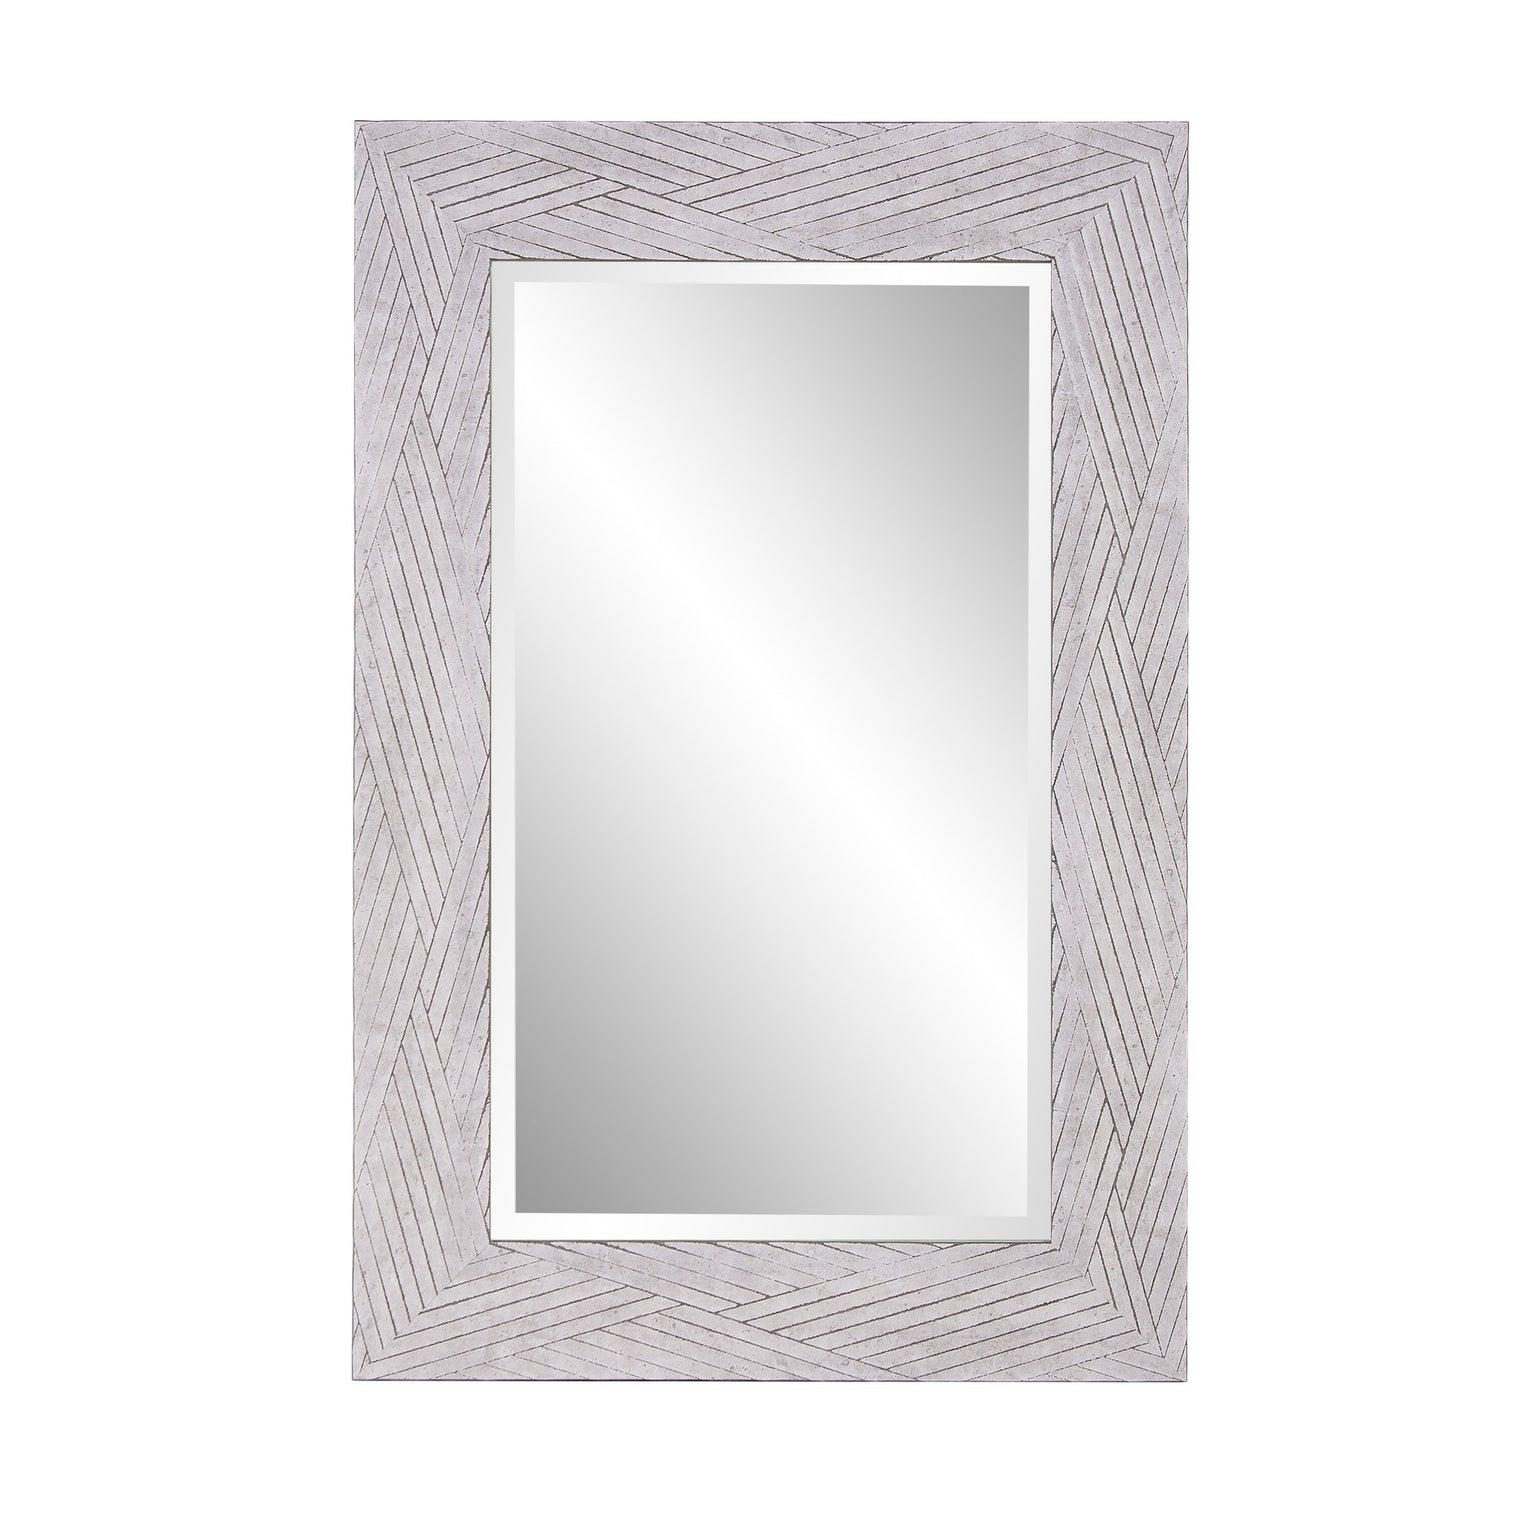 Weathered Gray Woven Faux Wood Rectangular Wall Mirror | 35